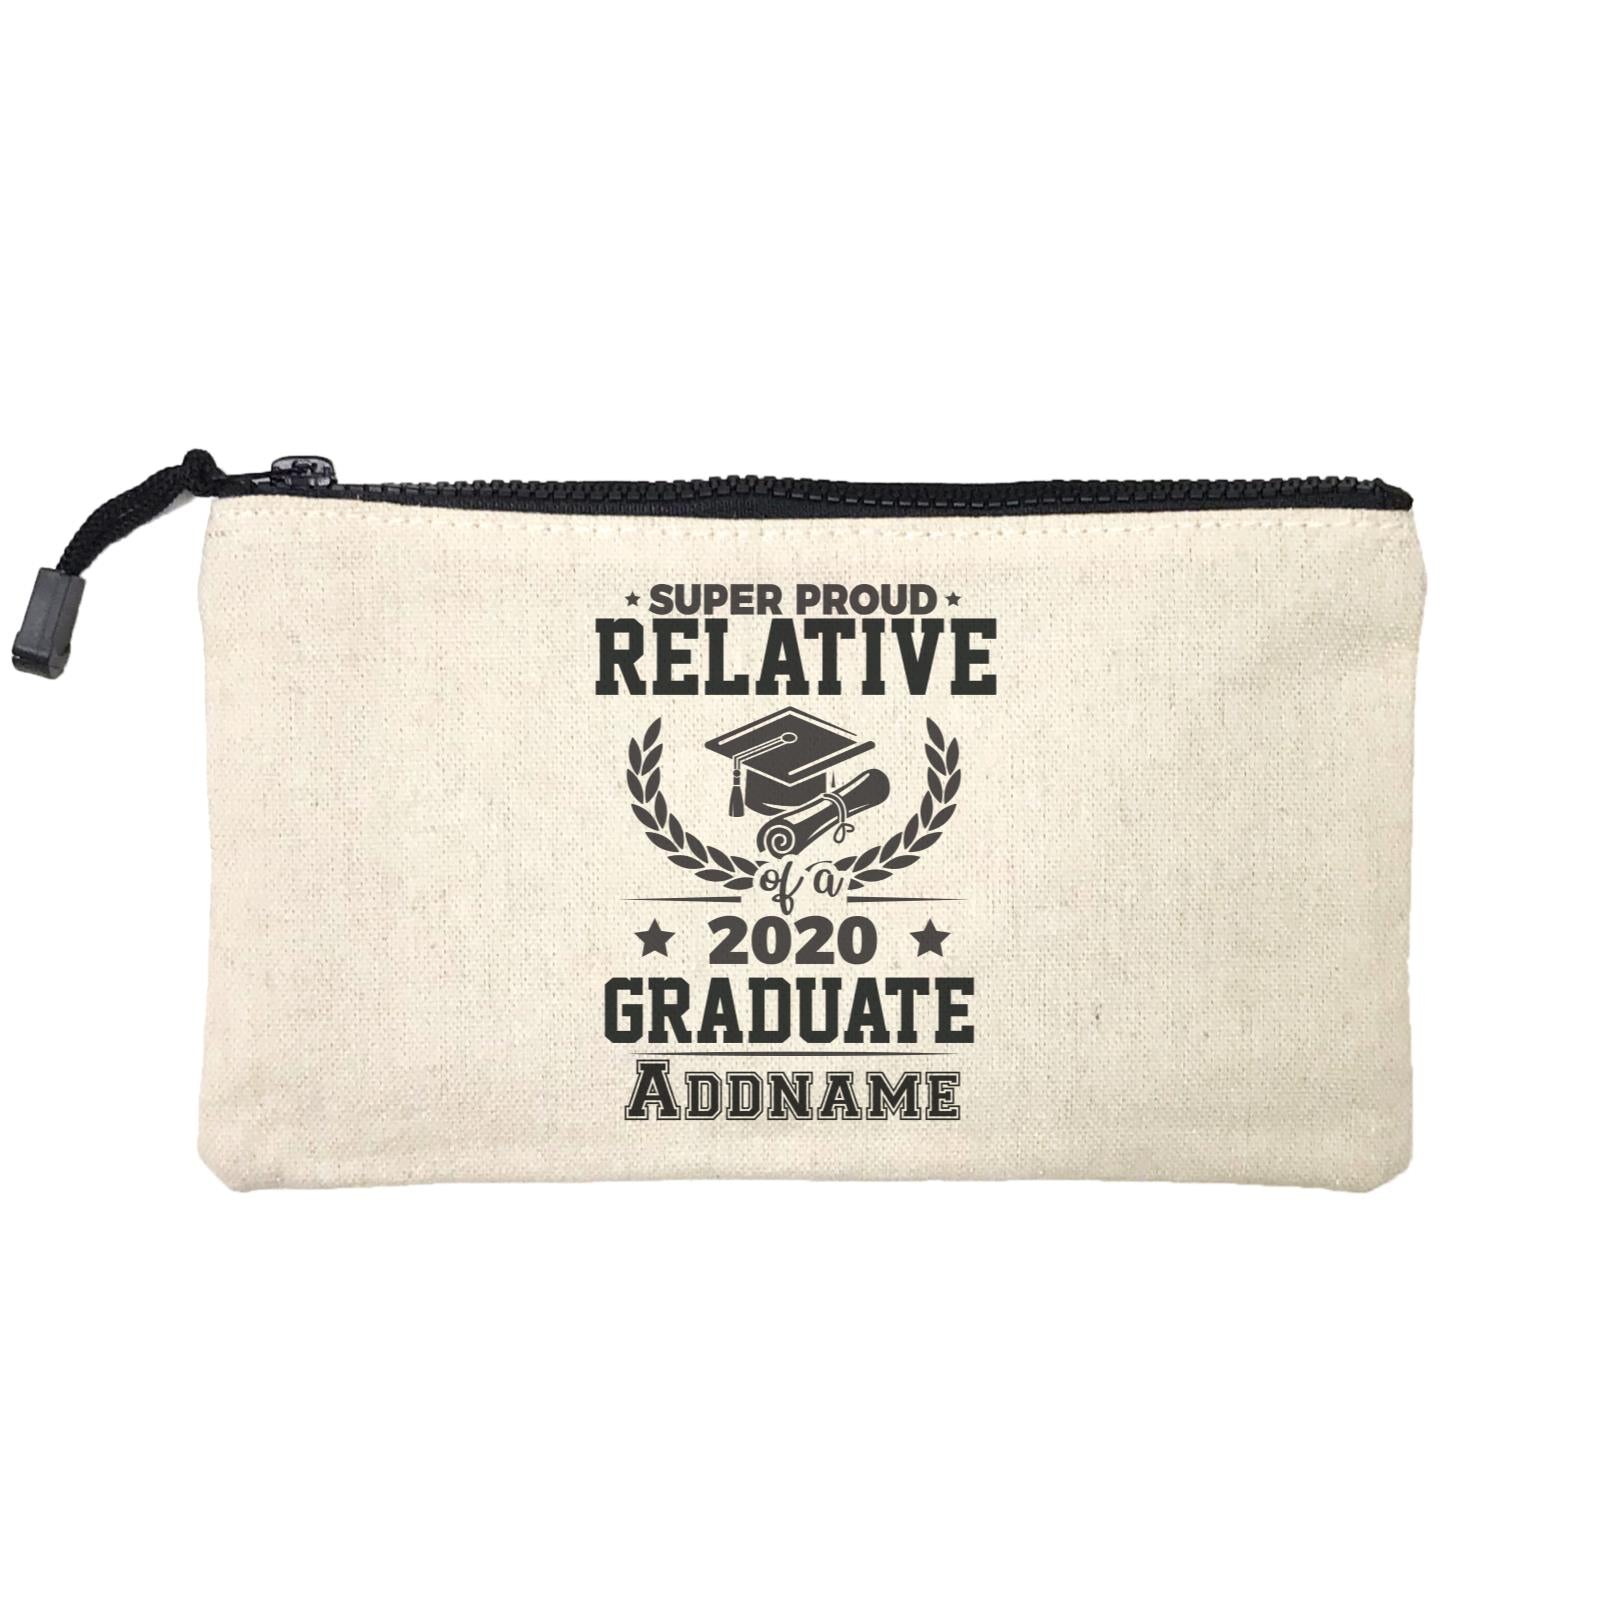 Graduation Series Super Proud Relatives of a Graduate Mini Accessories Stationery Pouch